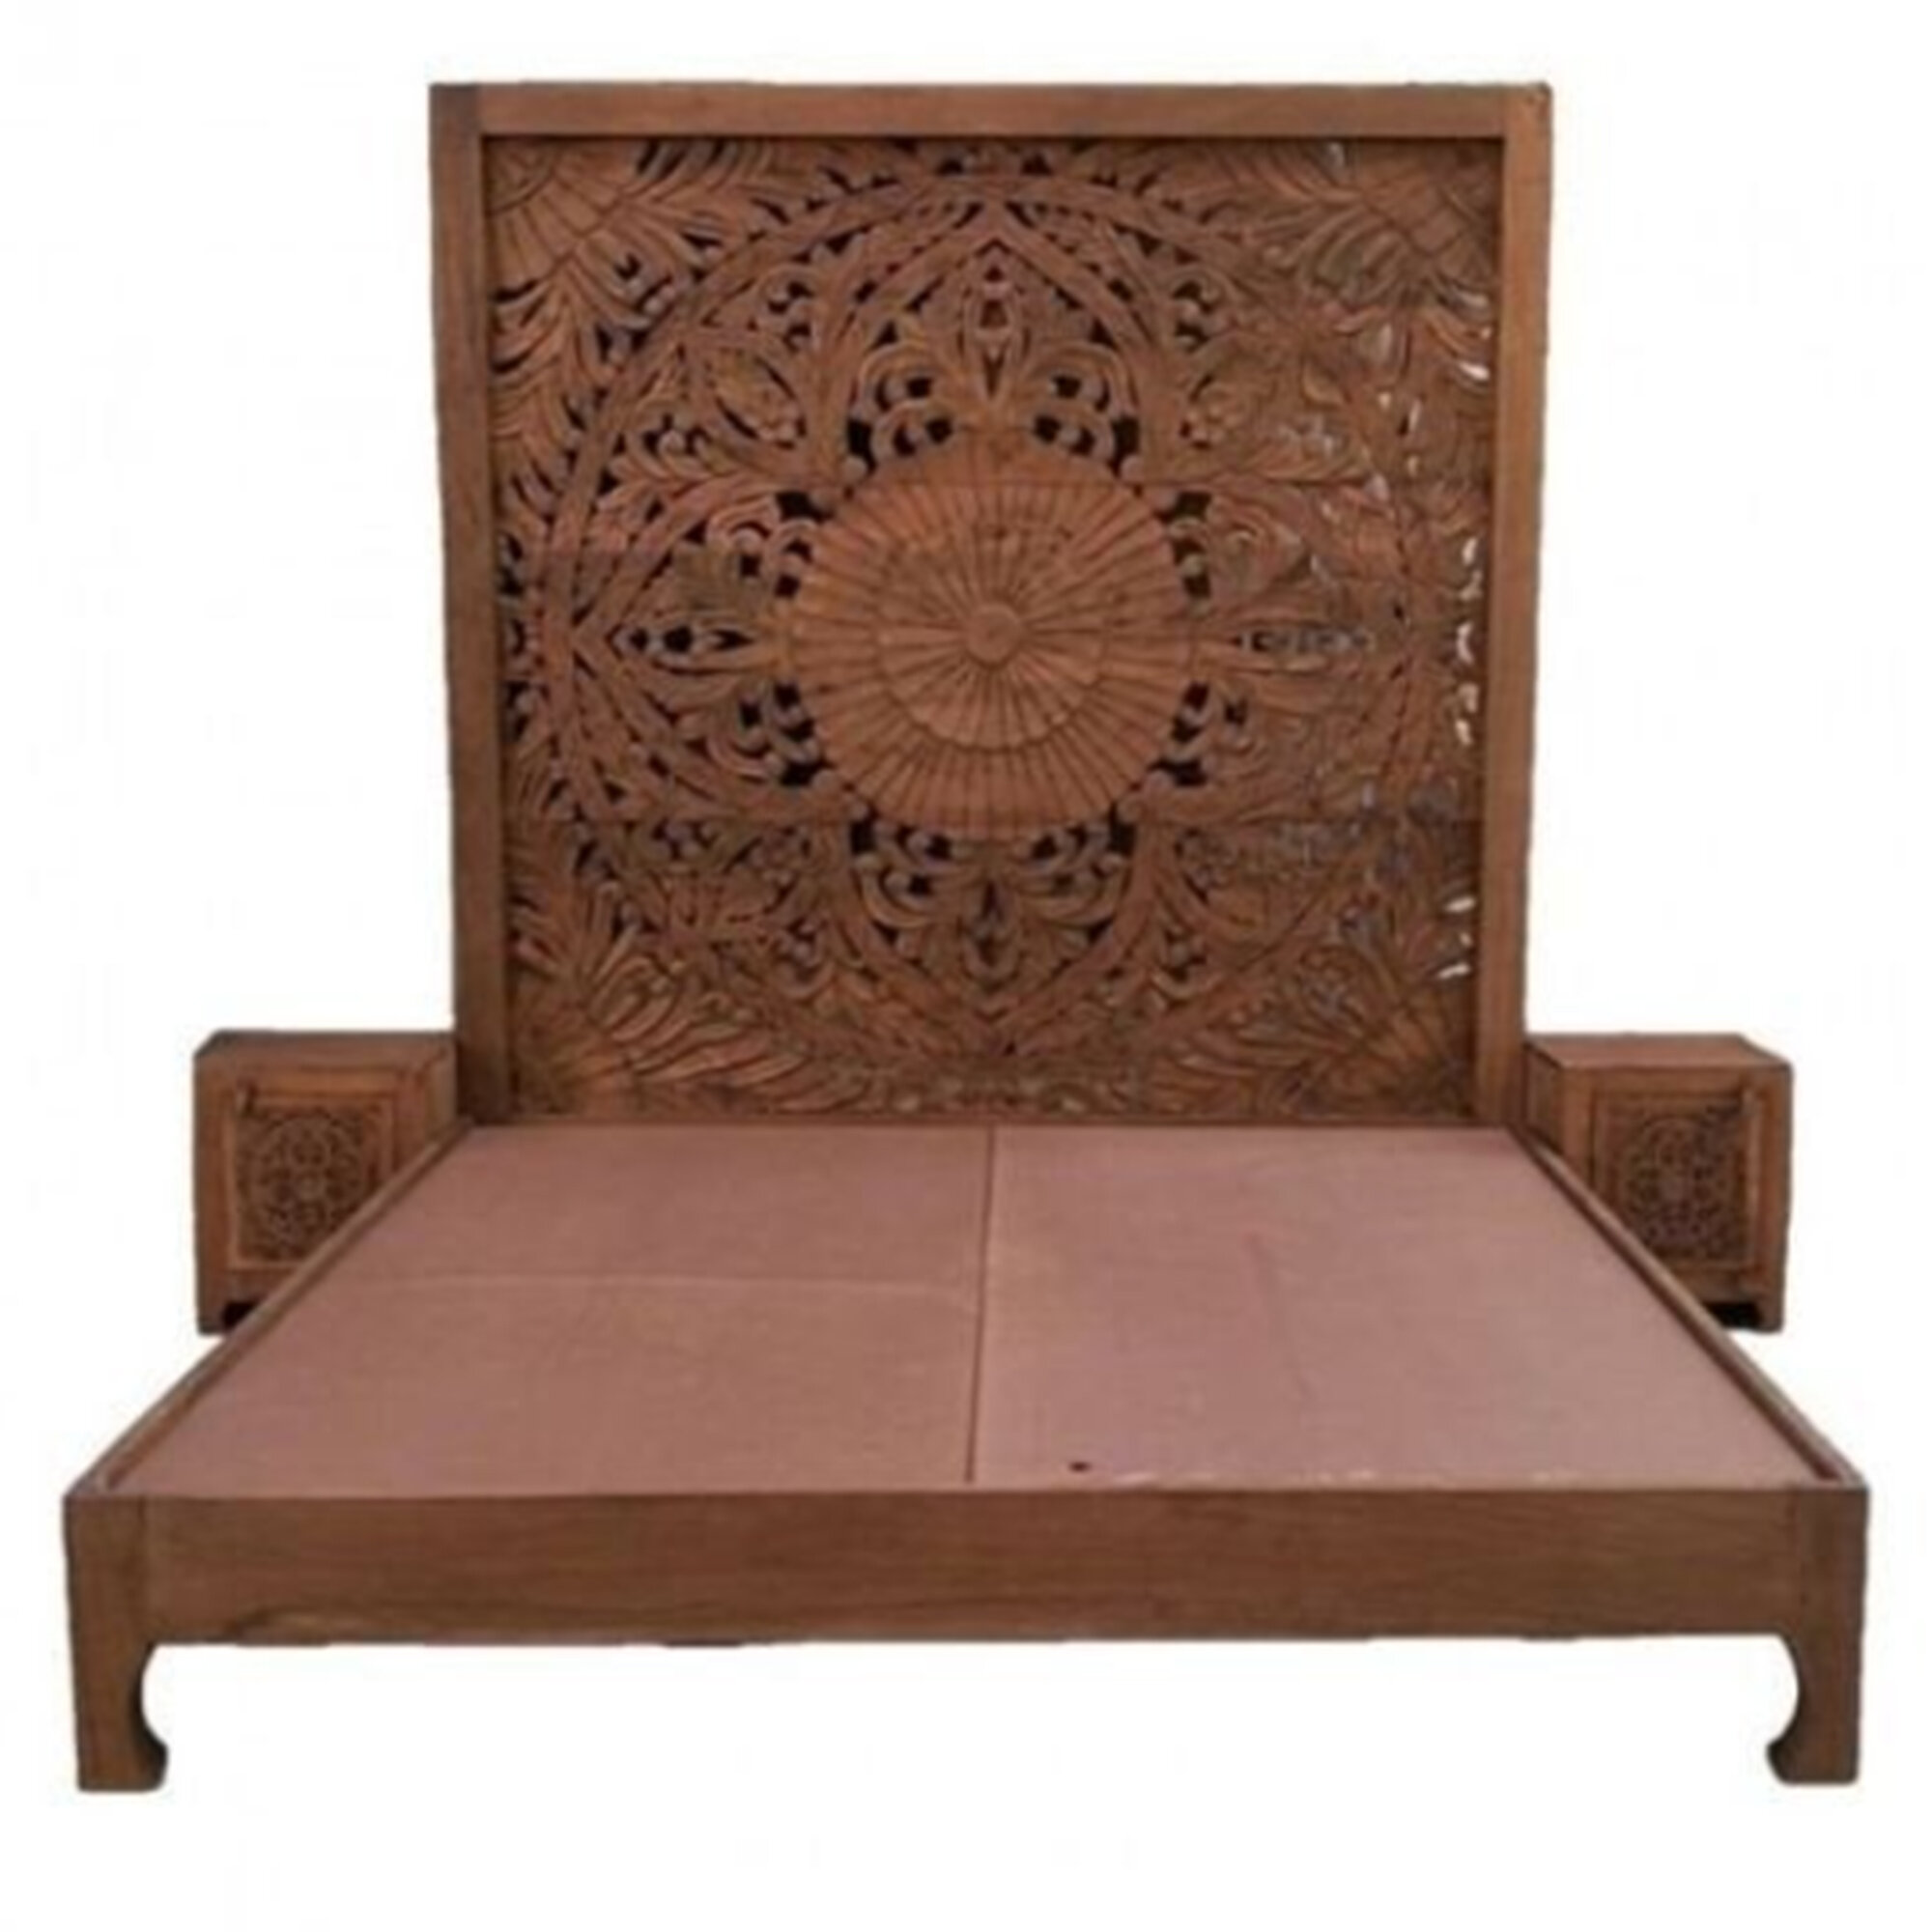 Dynasty Hand Carved Indian Bed: Exquisite Craftsmanship From The Subcontinent